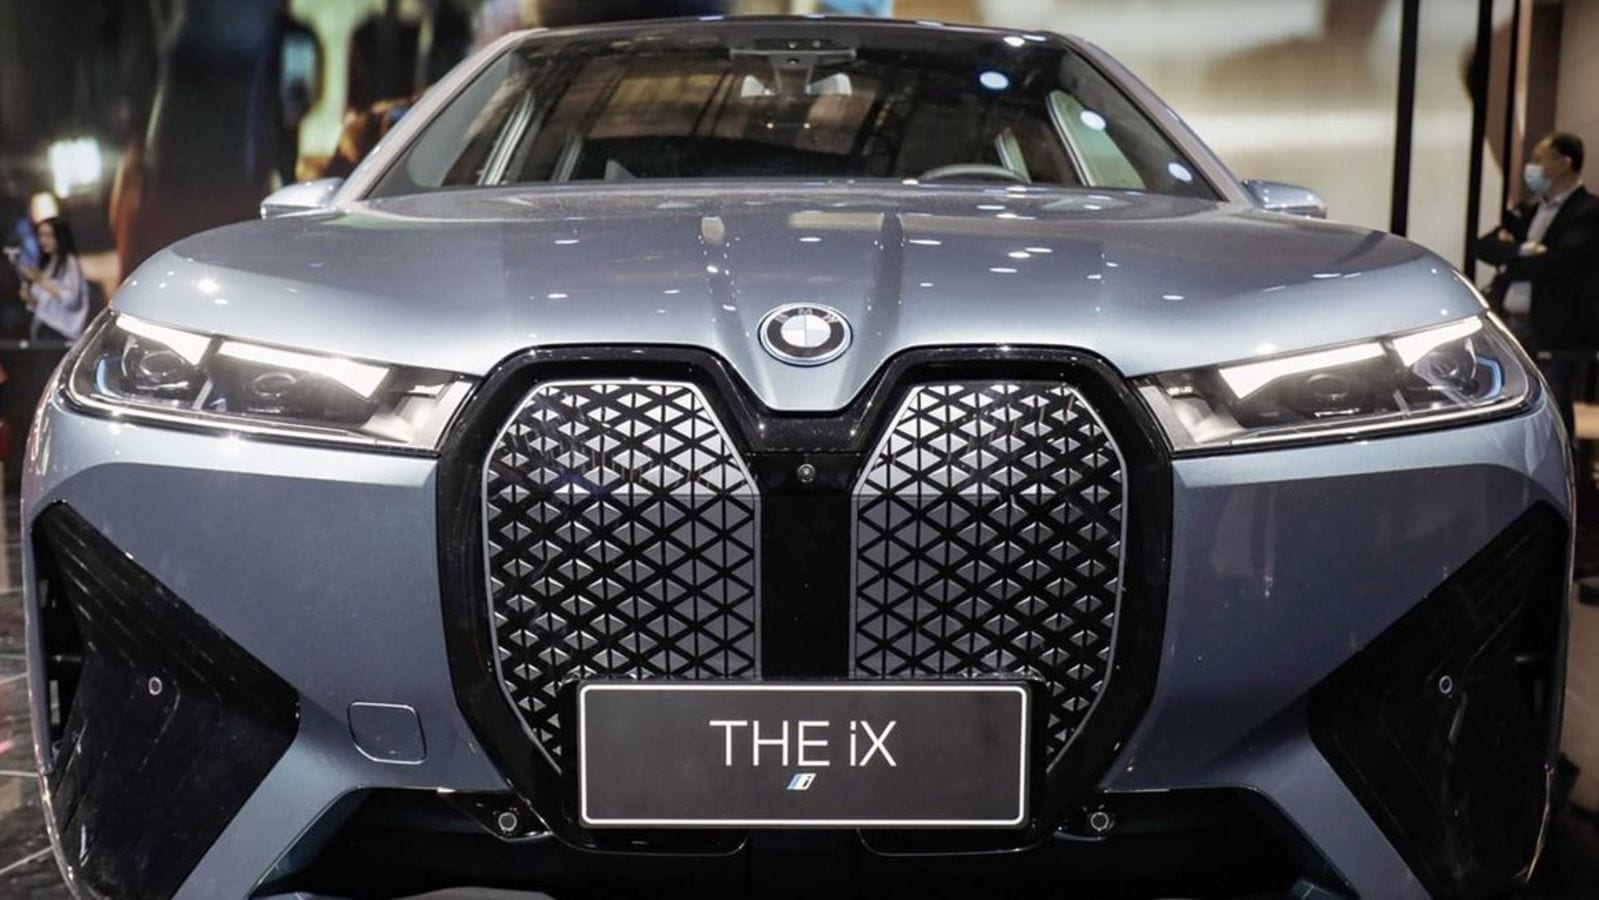 Signature Car Grilles of Popular Companies: BMW, Ford & More